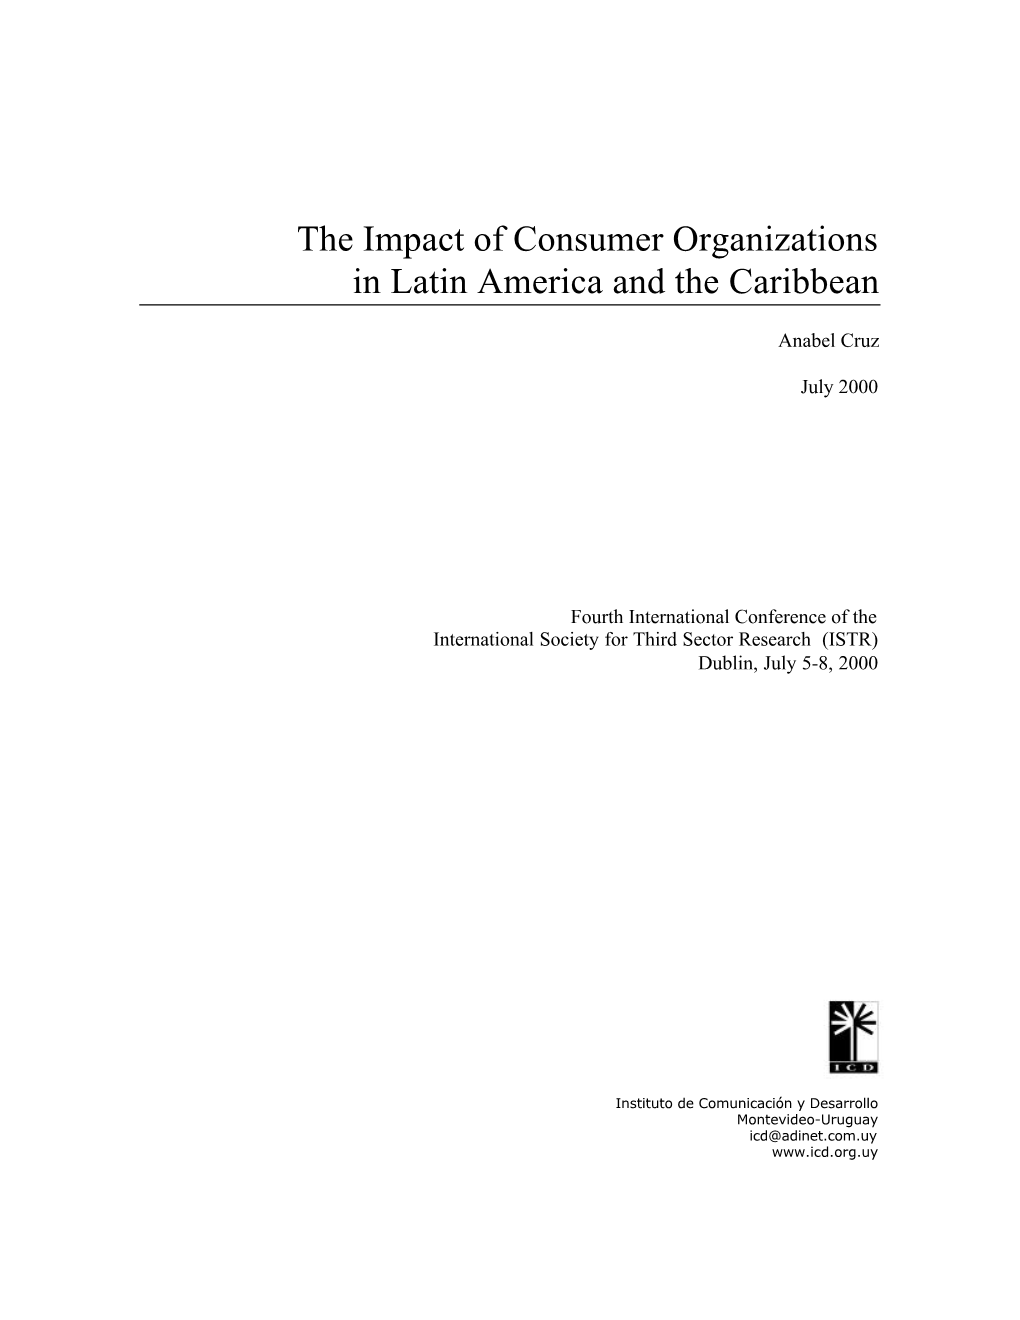 The Impact of Consumer Organizations in Latin America and the Caribbean